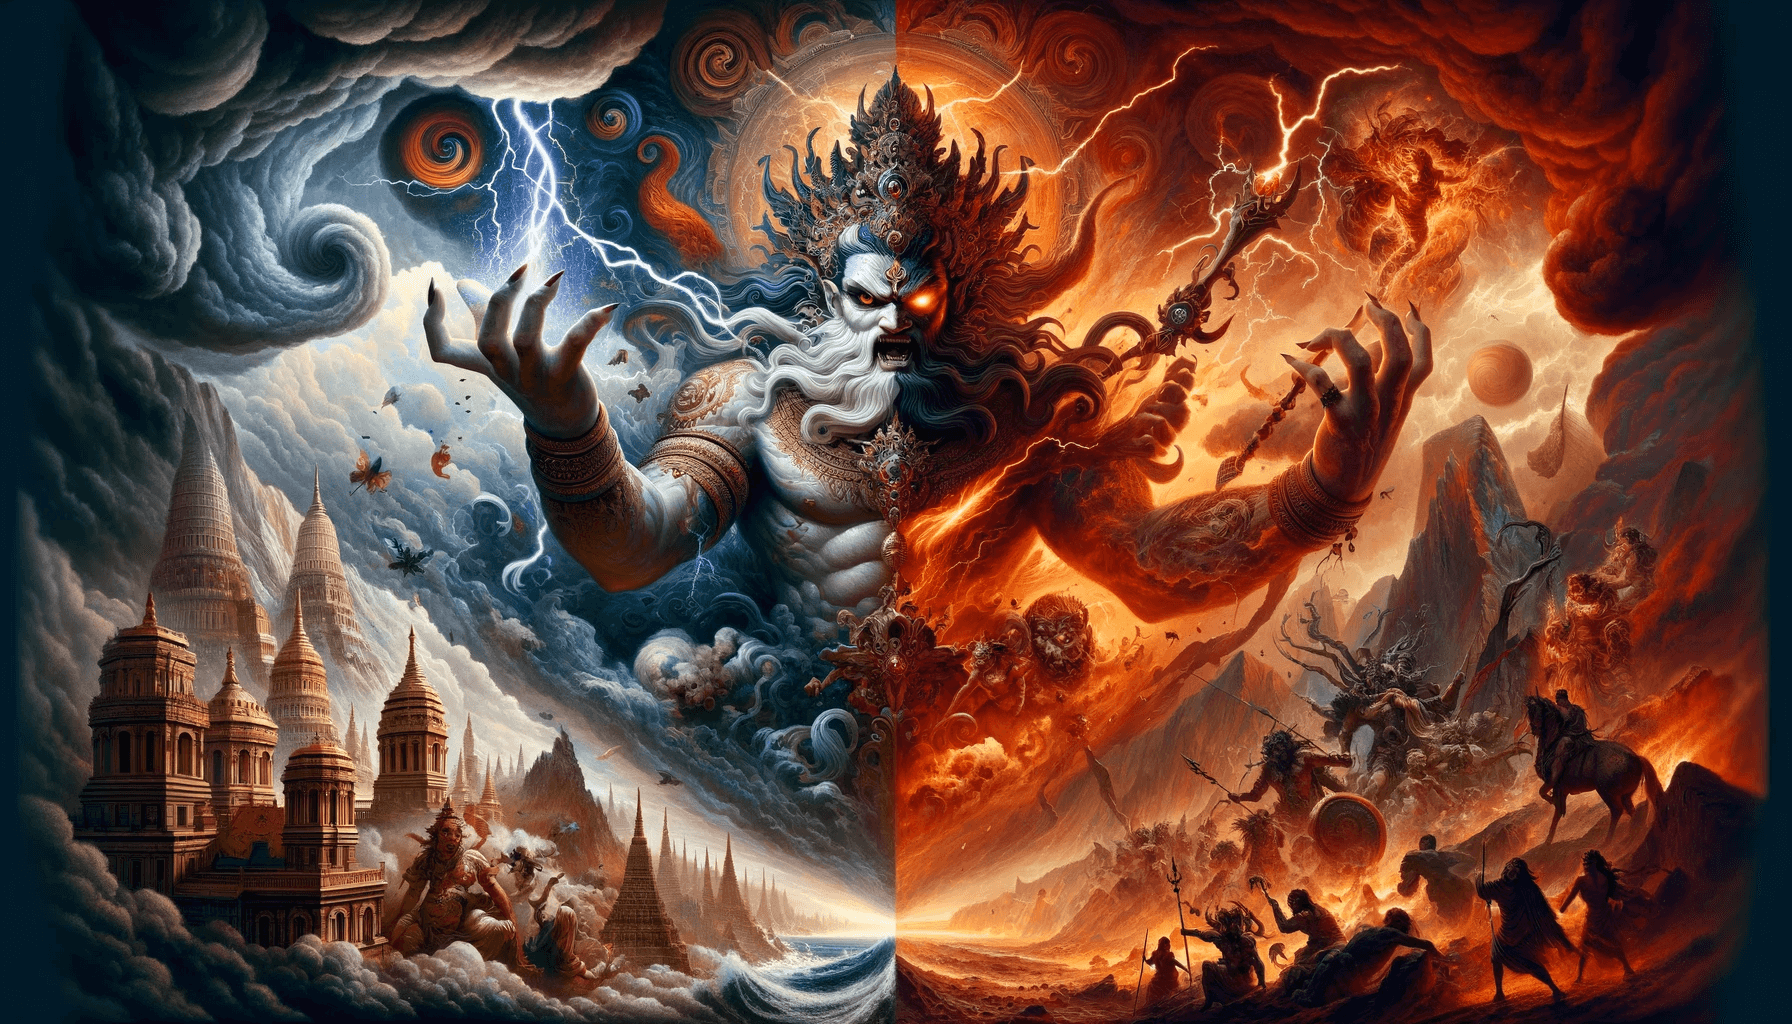 Divine Wrath: A Force to Be Reckoned With – Exploring the Historical and Mythological Significance